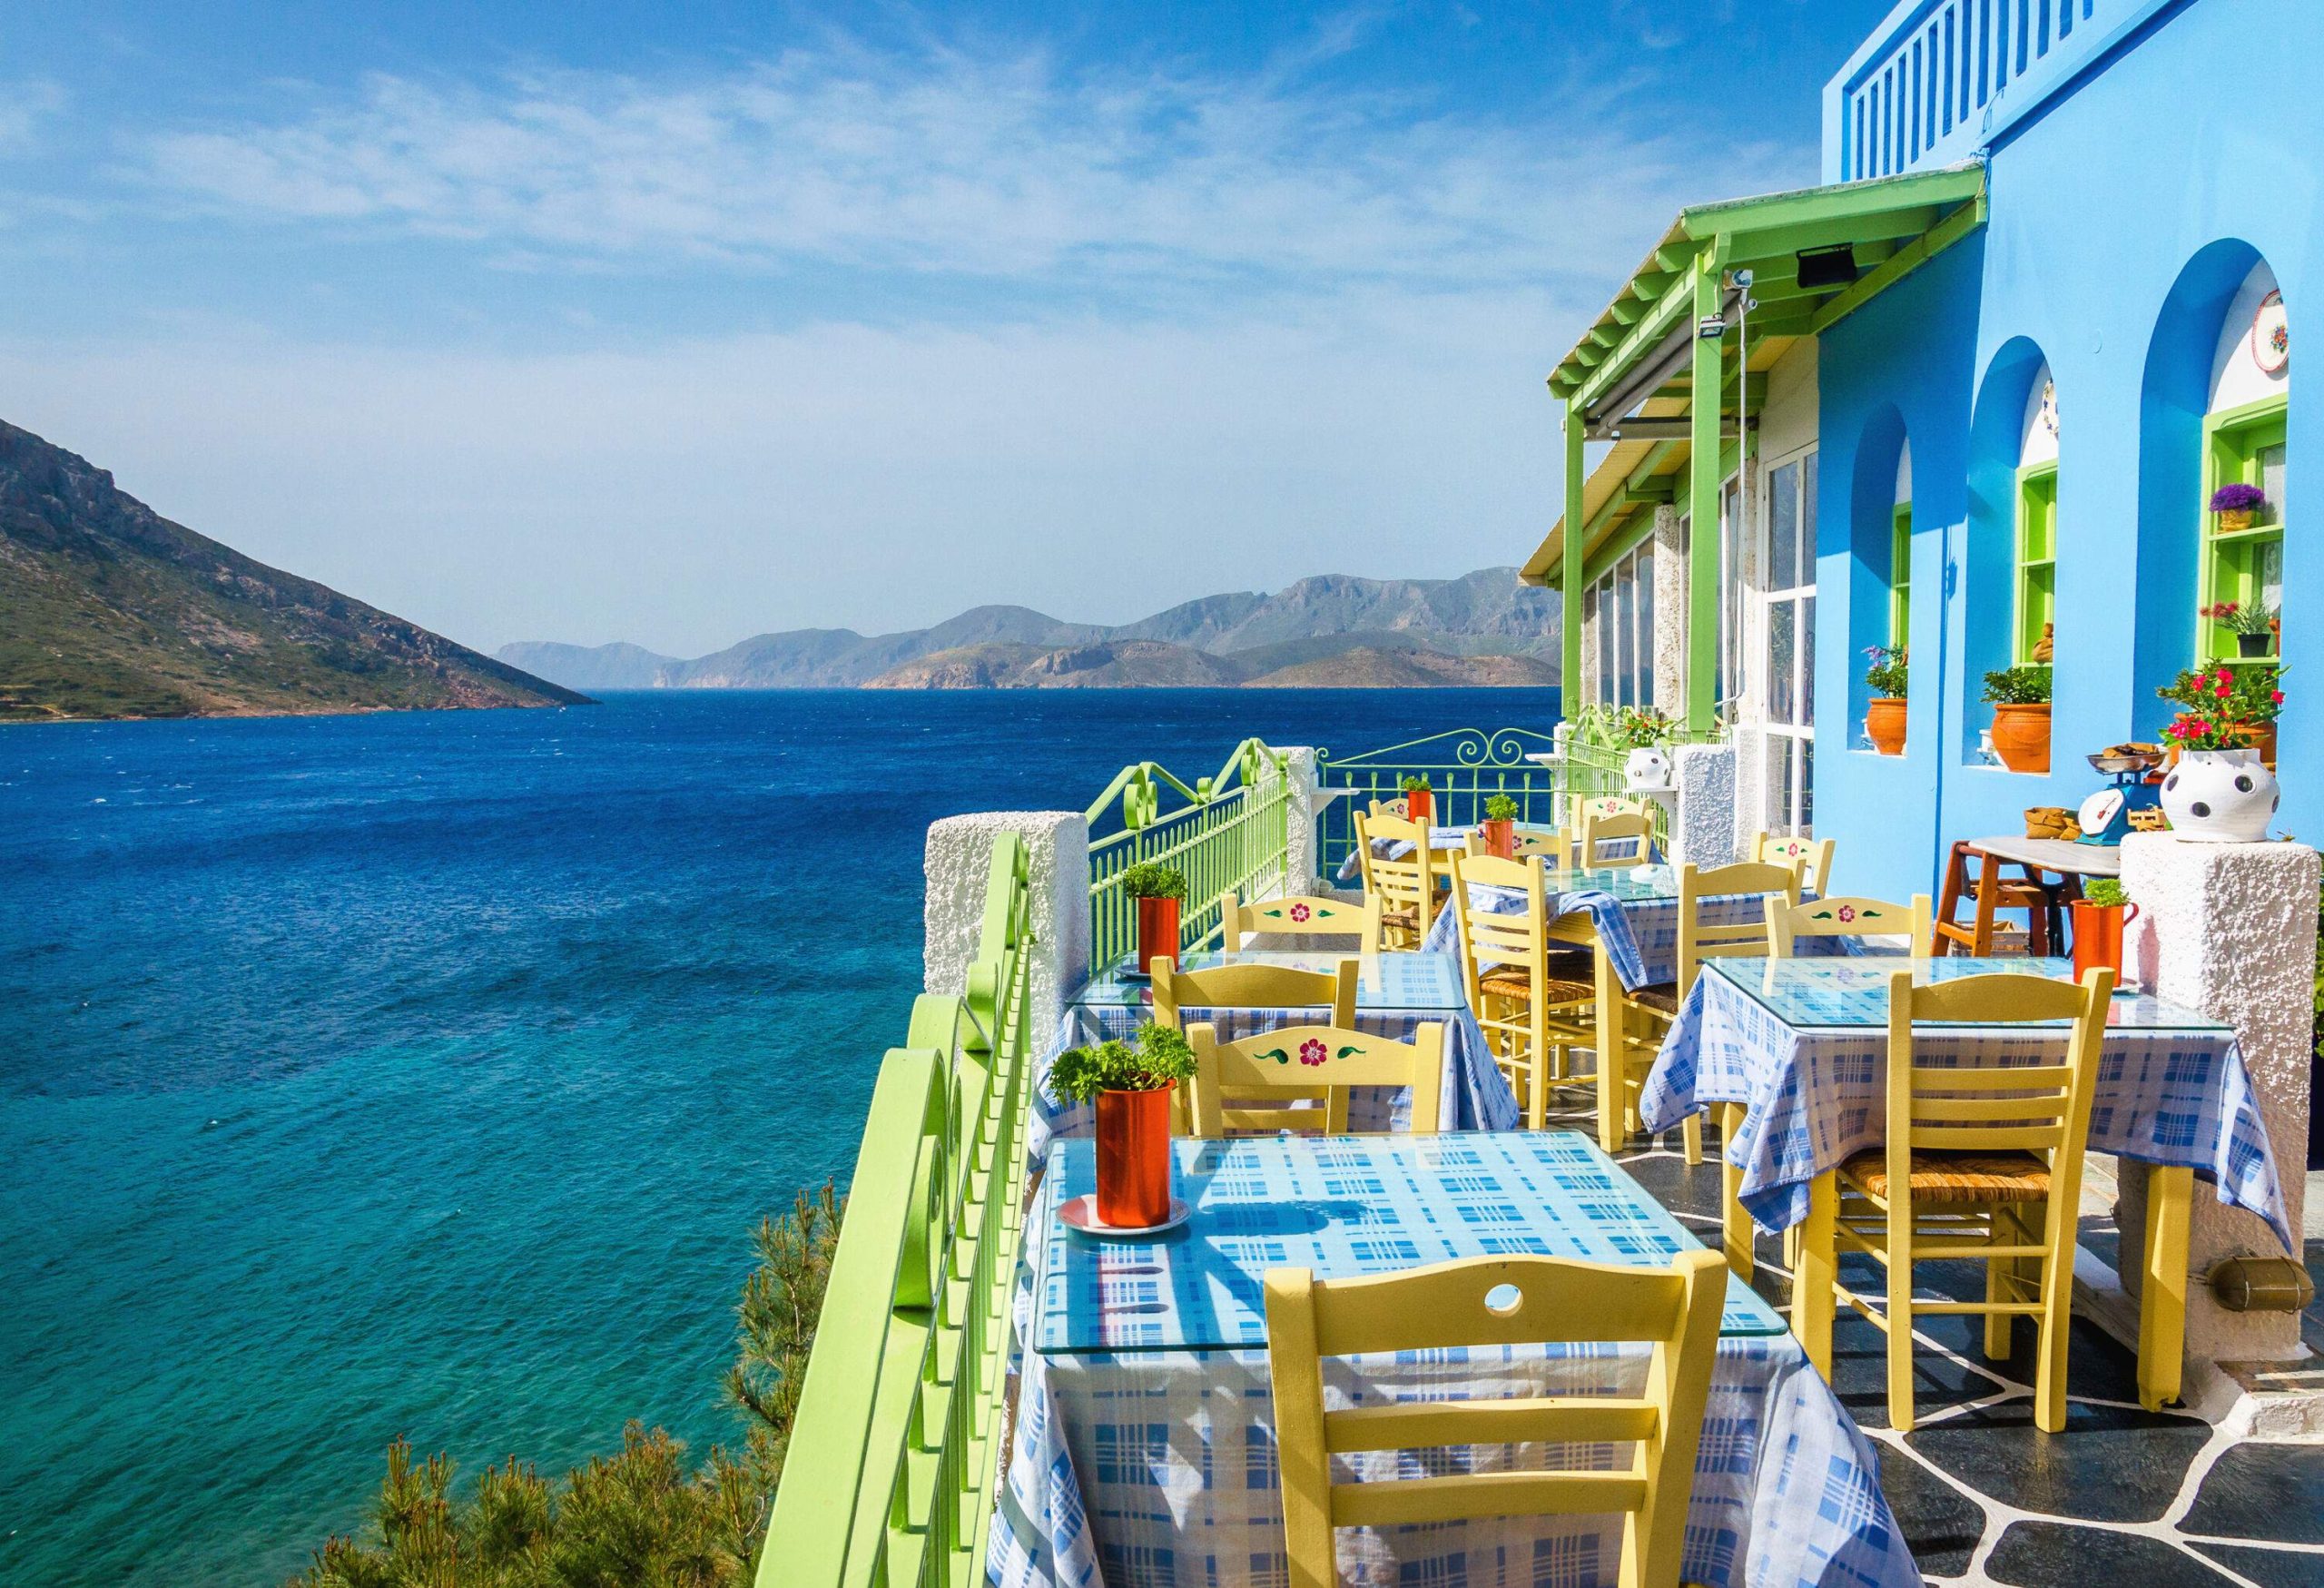 A sky blue restaurant with an outdoor dining area on a balcony with sweeping views of the sea.